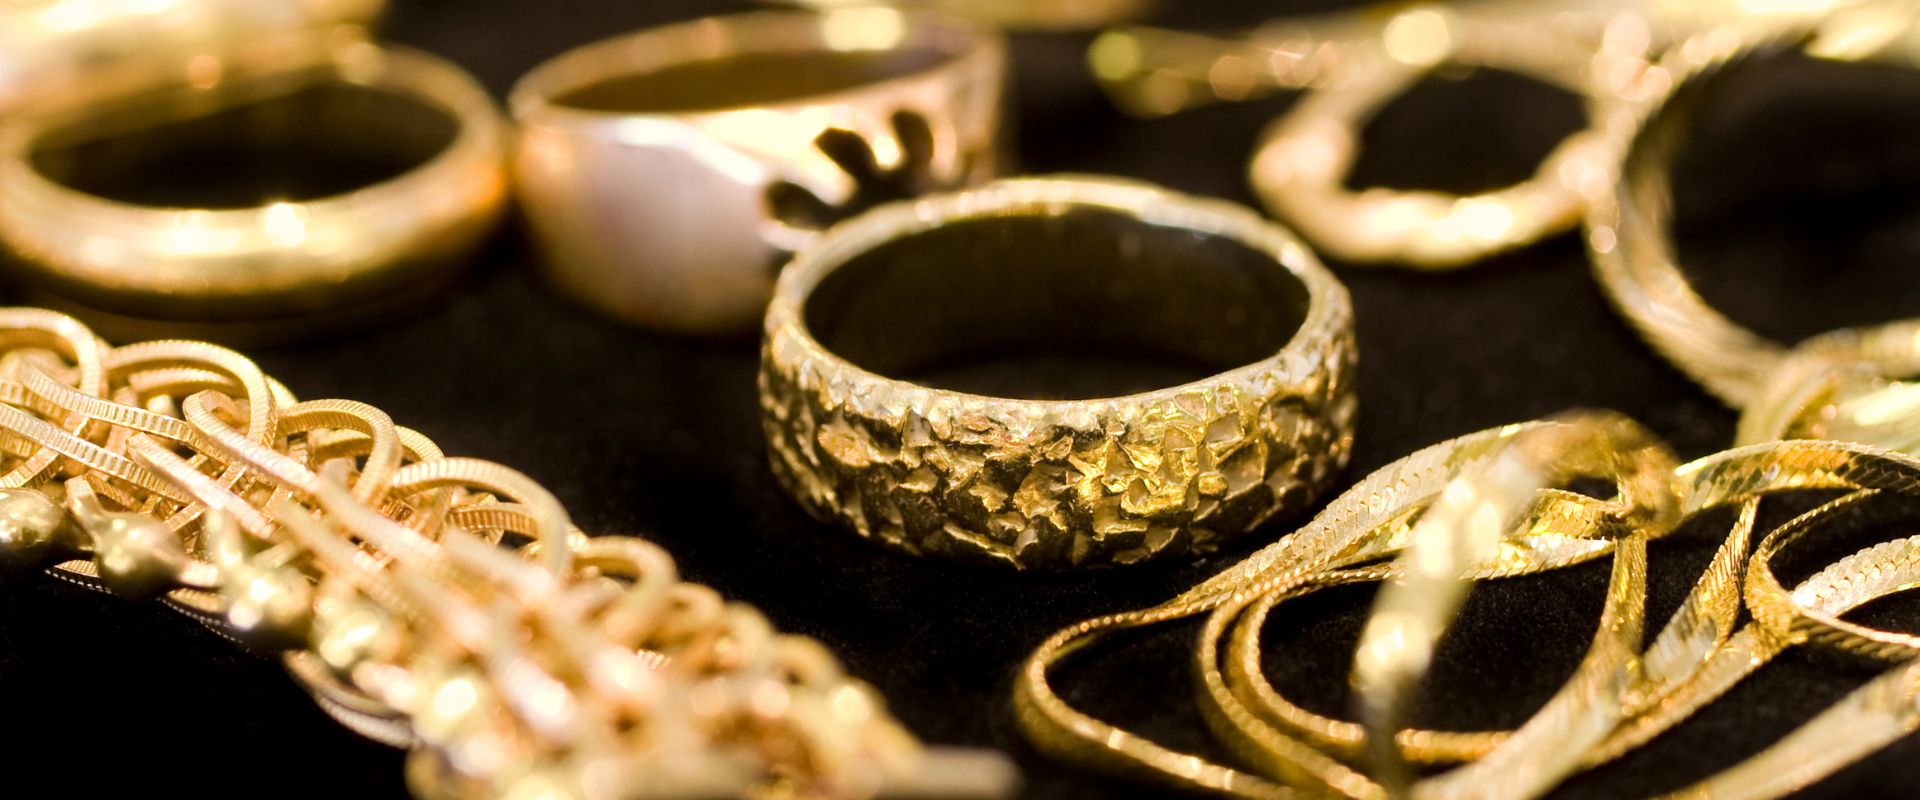 different kinds of gold jewelries sitting on a black cloth